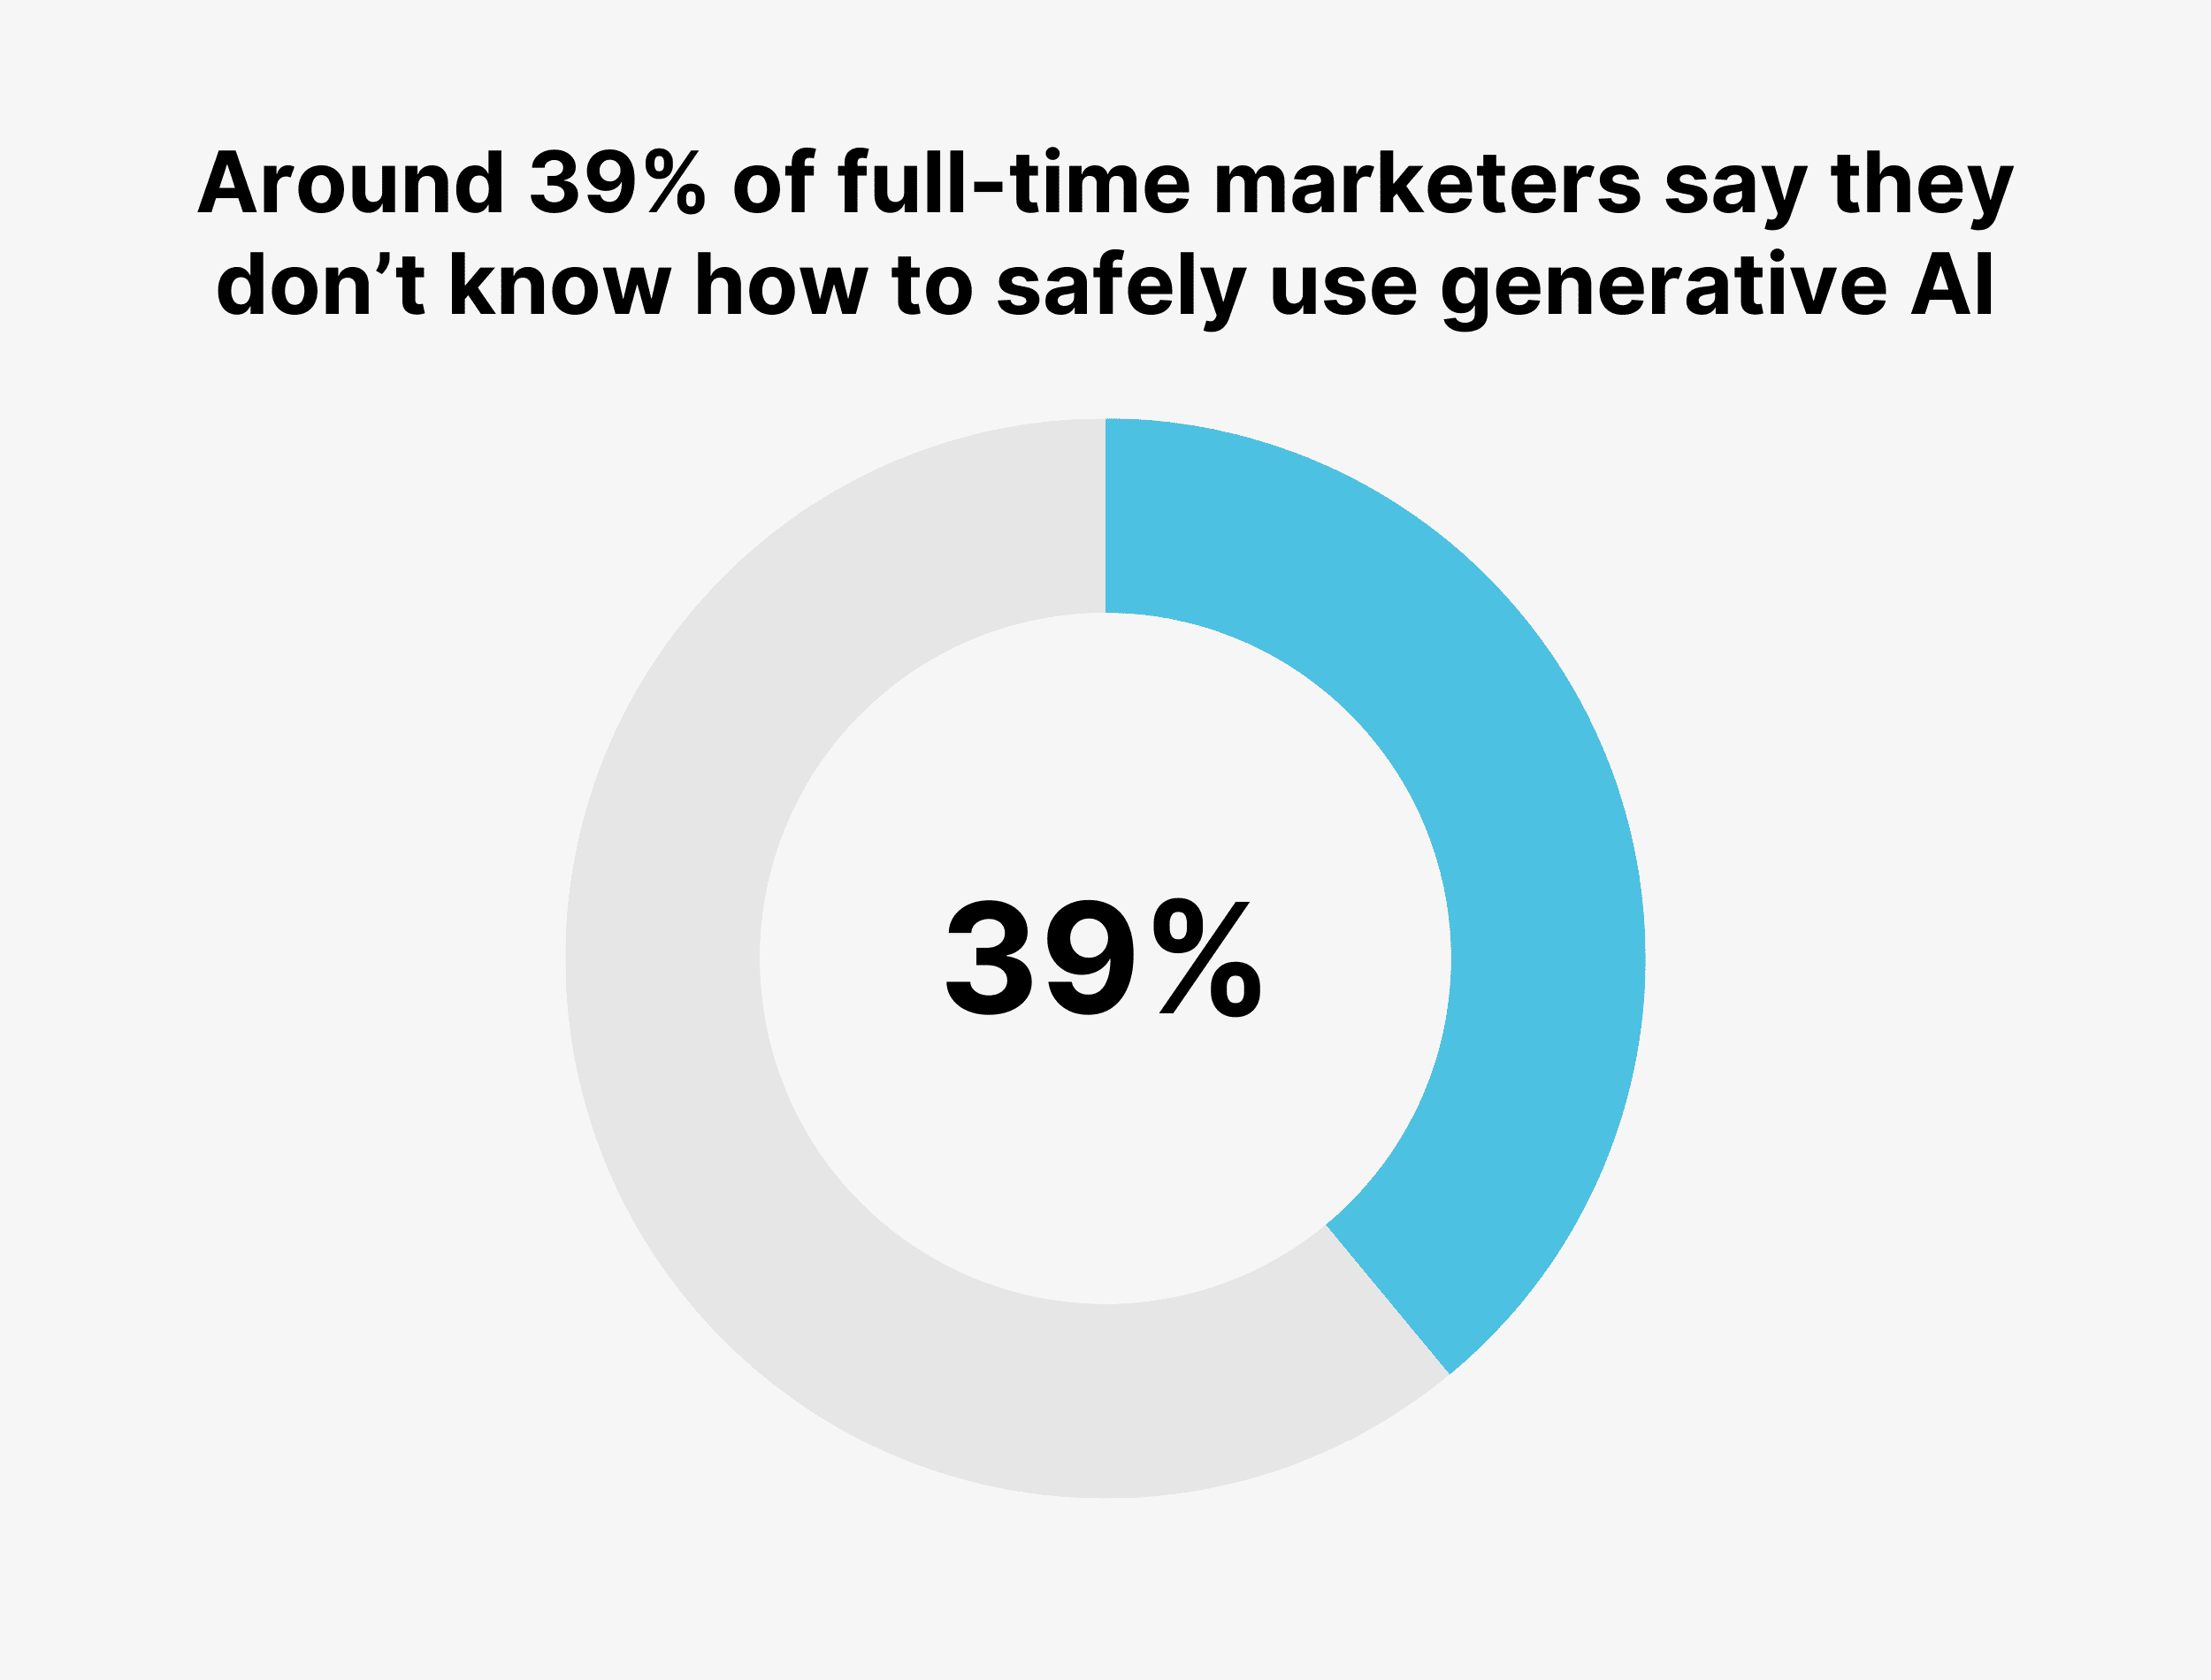 Around 39% of full-time marketers say they don’t know how to safely use generative AI